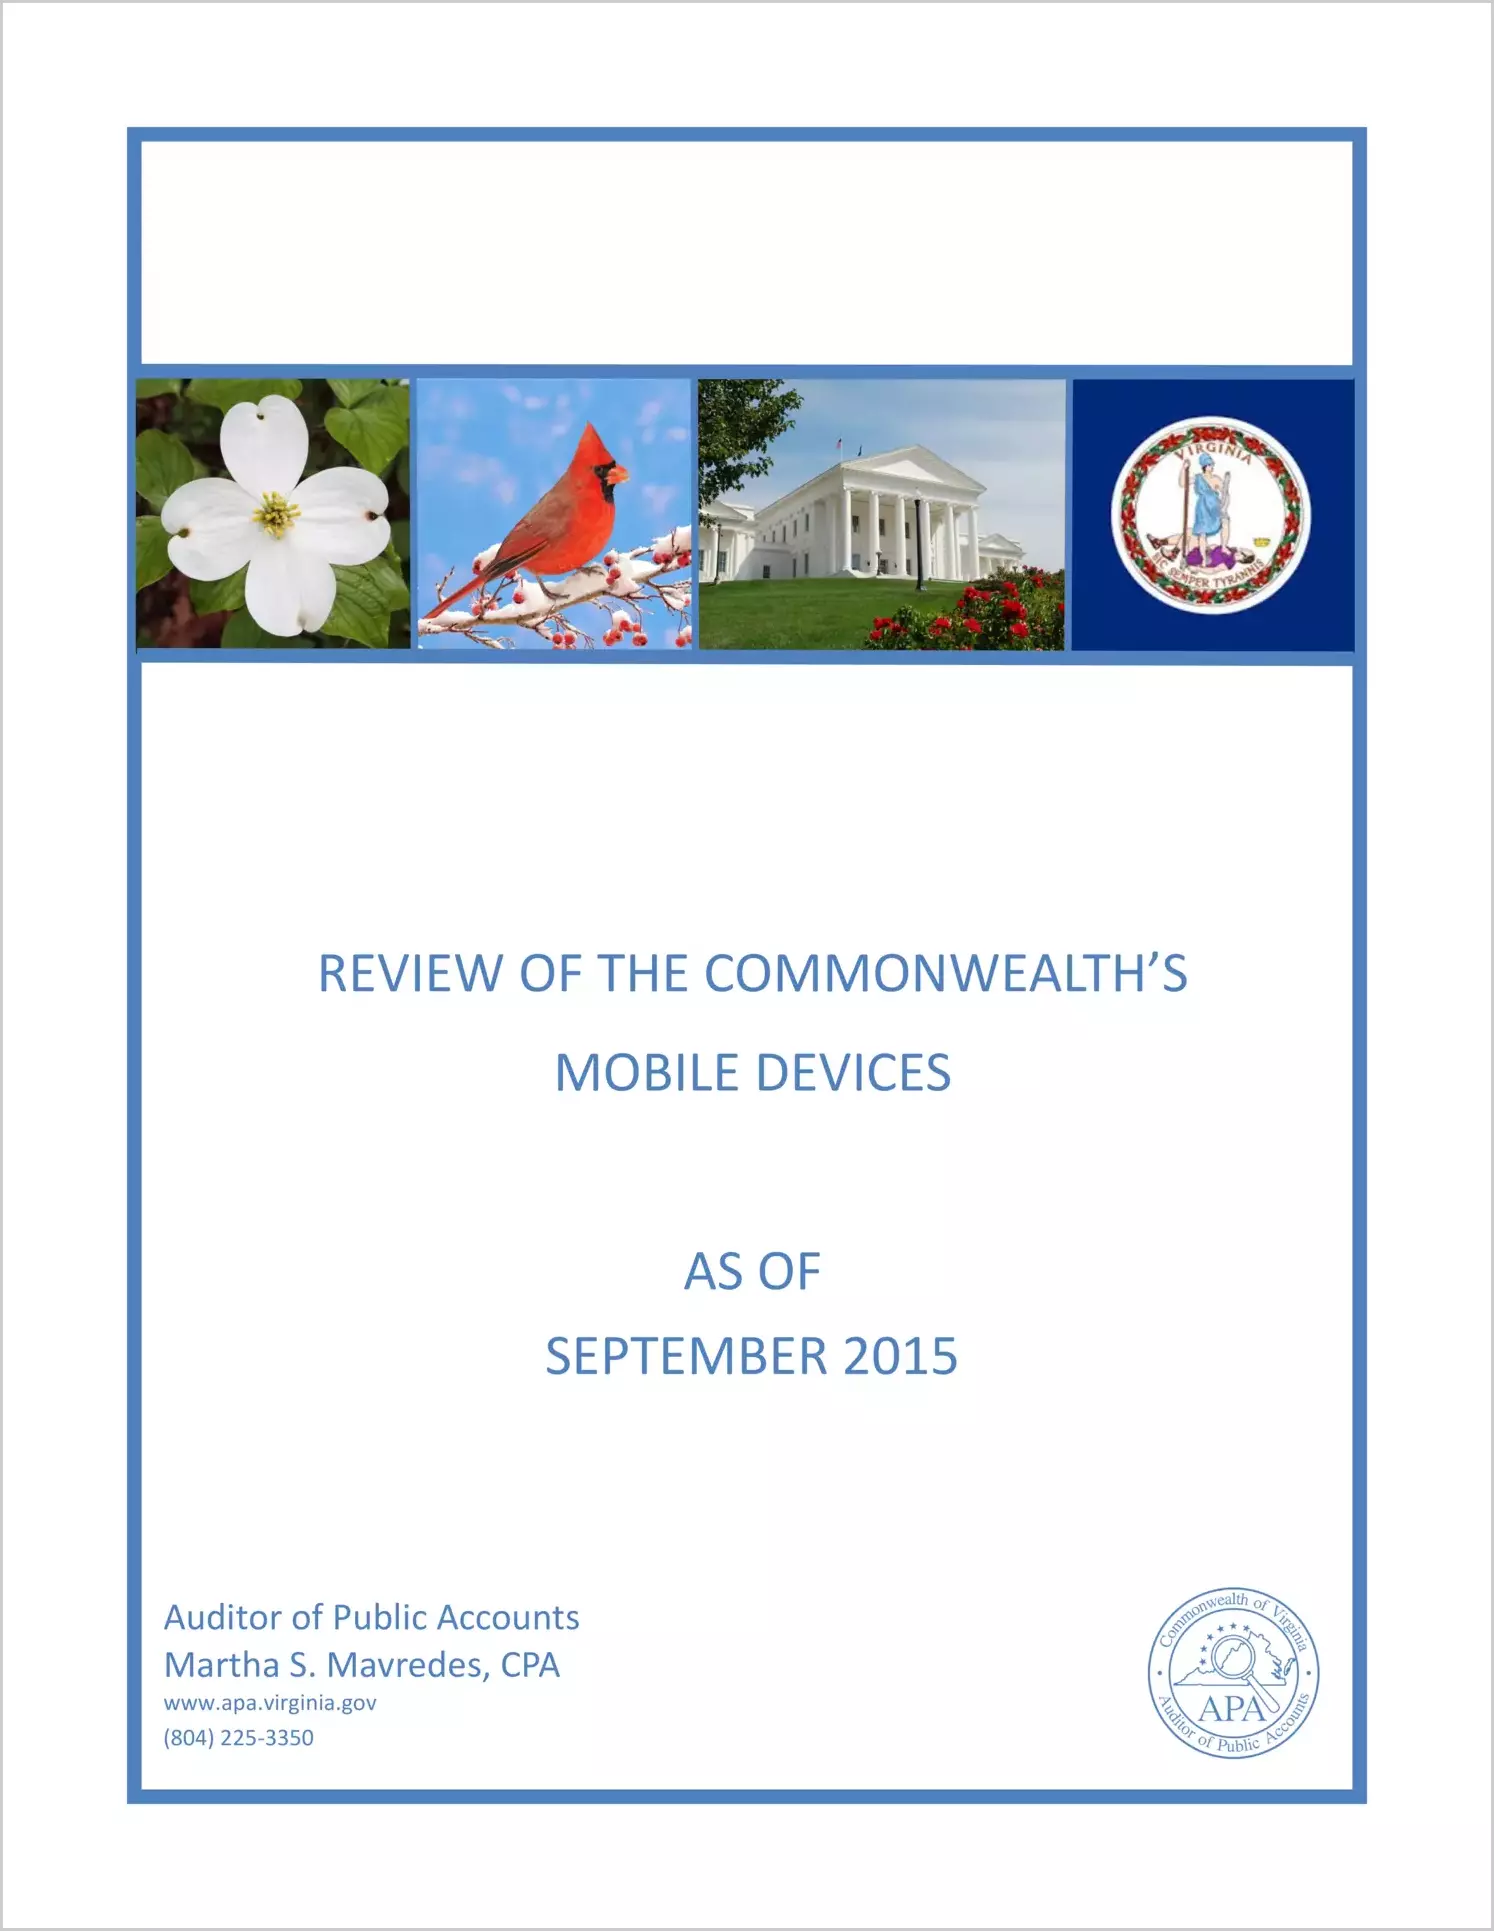 Review of the Commonwealth's Mobile Devices as of September 2015